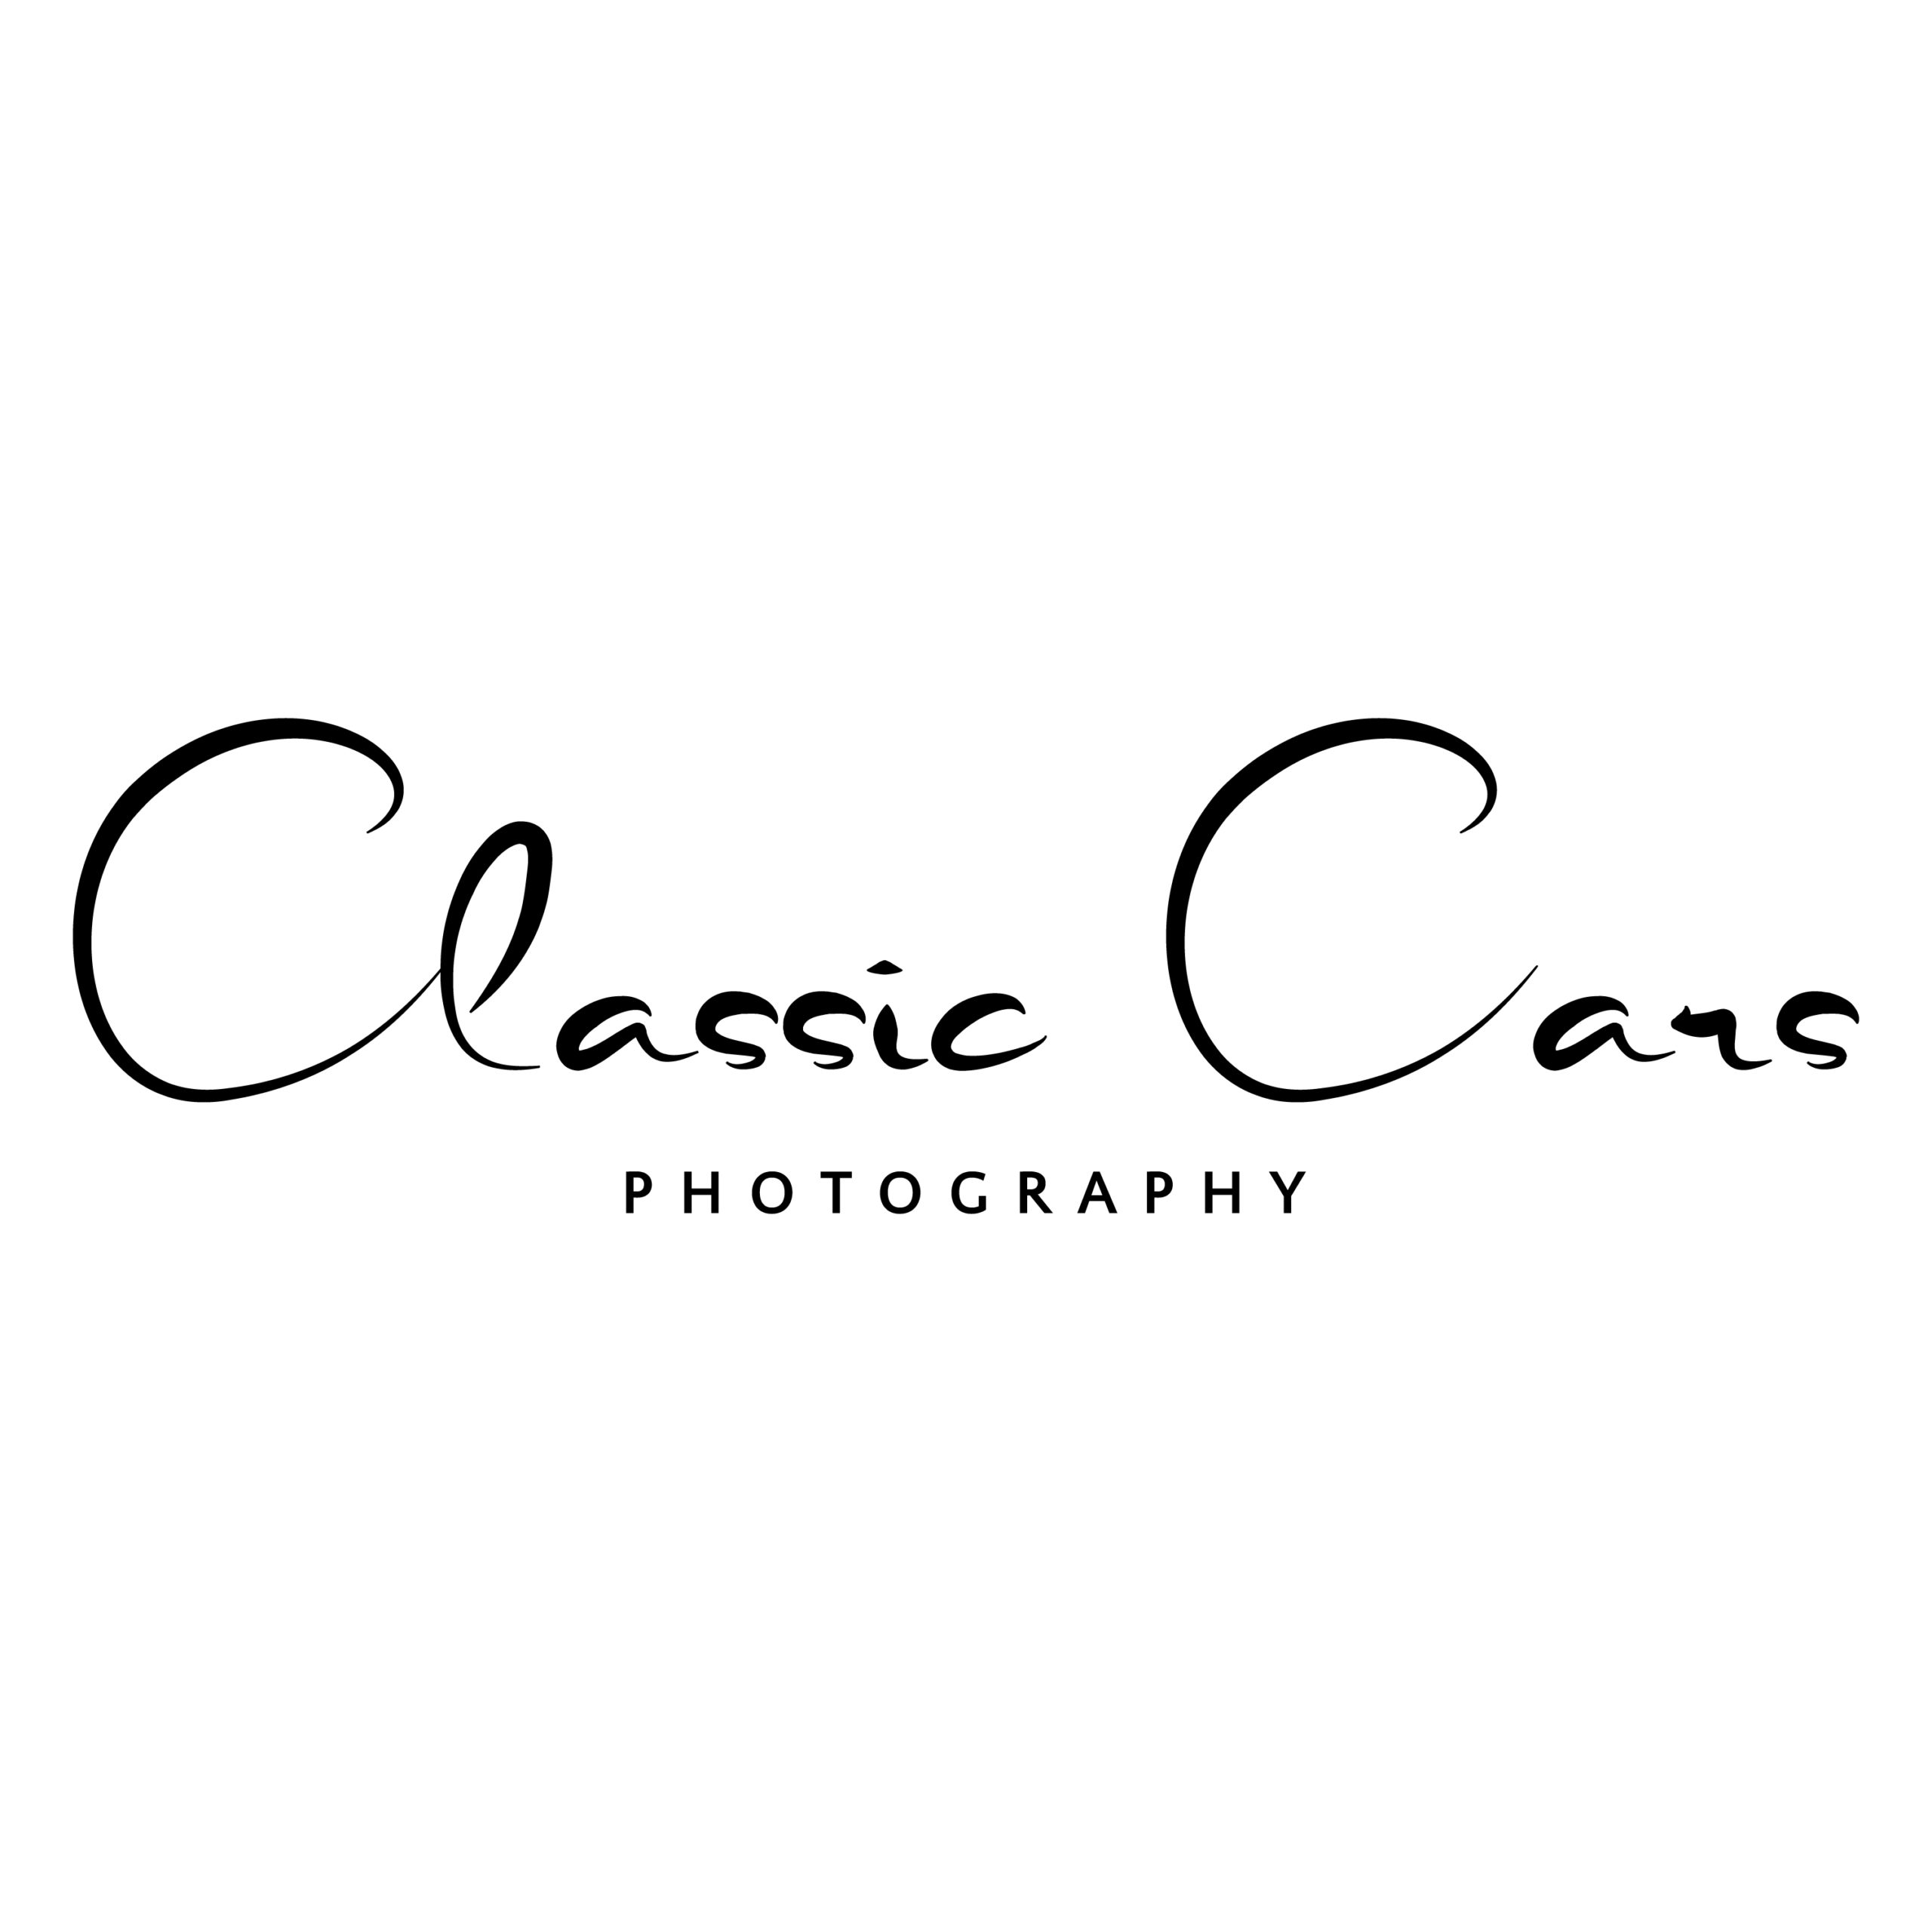 Classic Cars photography